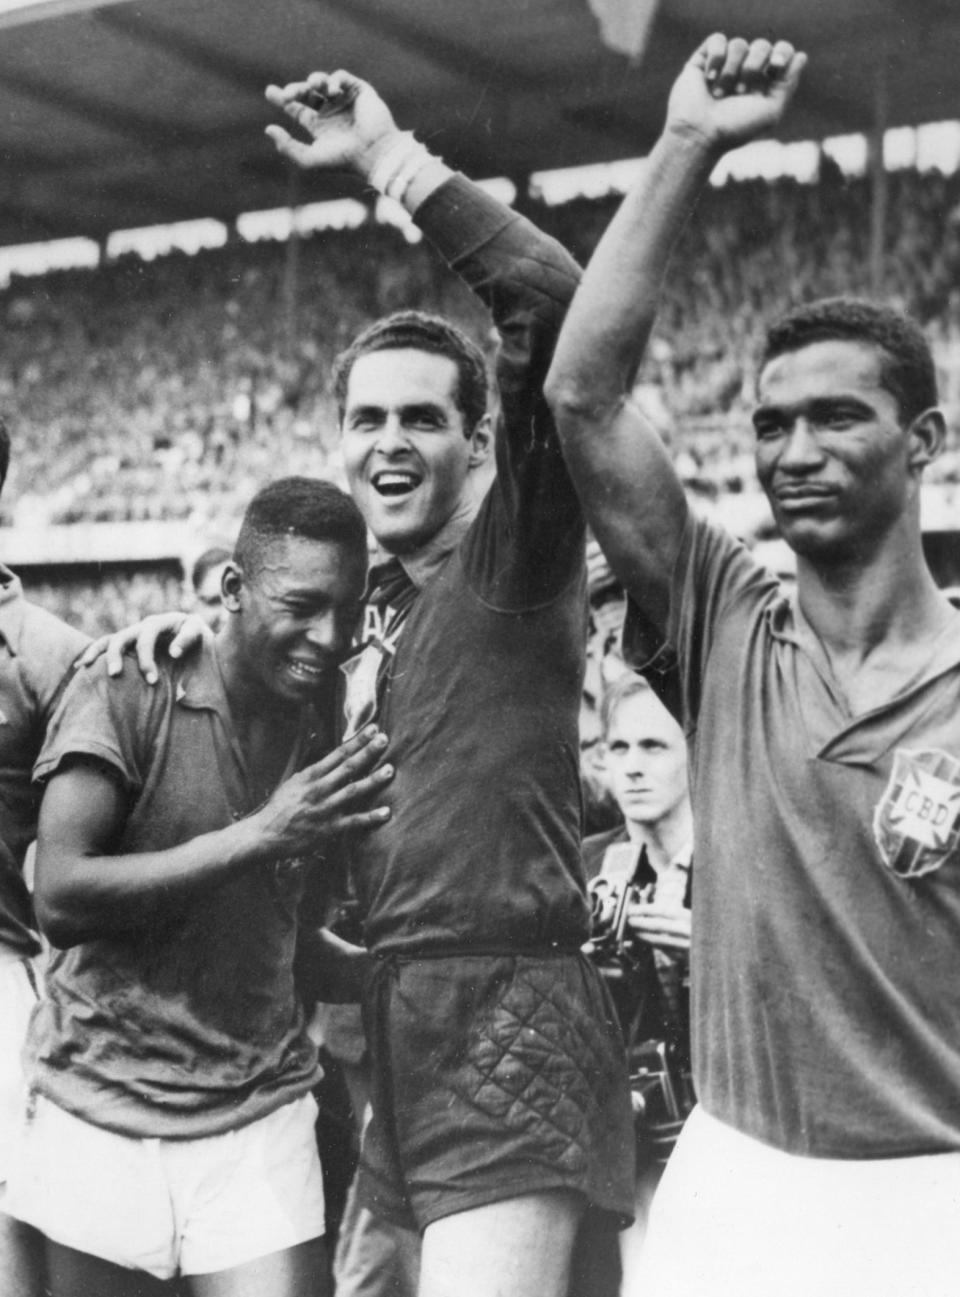 FILE - In this June 29, 1958 file photo, Brazil's 17-year-old Pele, left, weeps on the shoulder of goalkeeper Gylmar Dos Santos Neves, as Didi stands right, after Brazil's 5-2 victory over Sweden in the final of the soccer World Cup in Stockholm, Sweden. On Oct. 23, 2020, the three-time World Cup winner Pelé turns 80 without a proper celebration amid the COVID-19 pandemic as he quarantines in his mansion in the beachfront city of Guarujá, where he has lived since the start of the pandemic. (AP Photo, File)